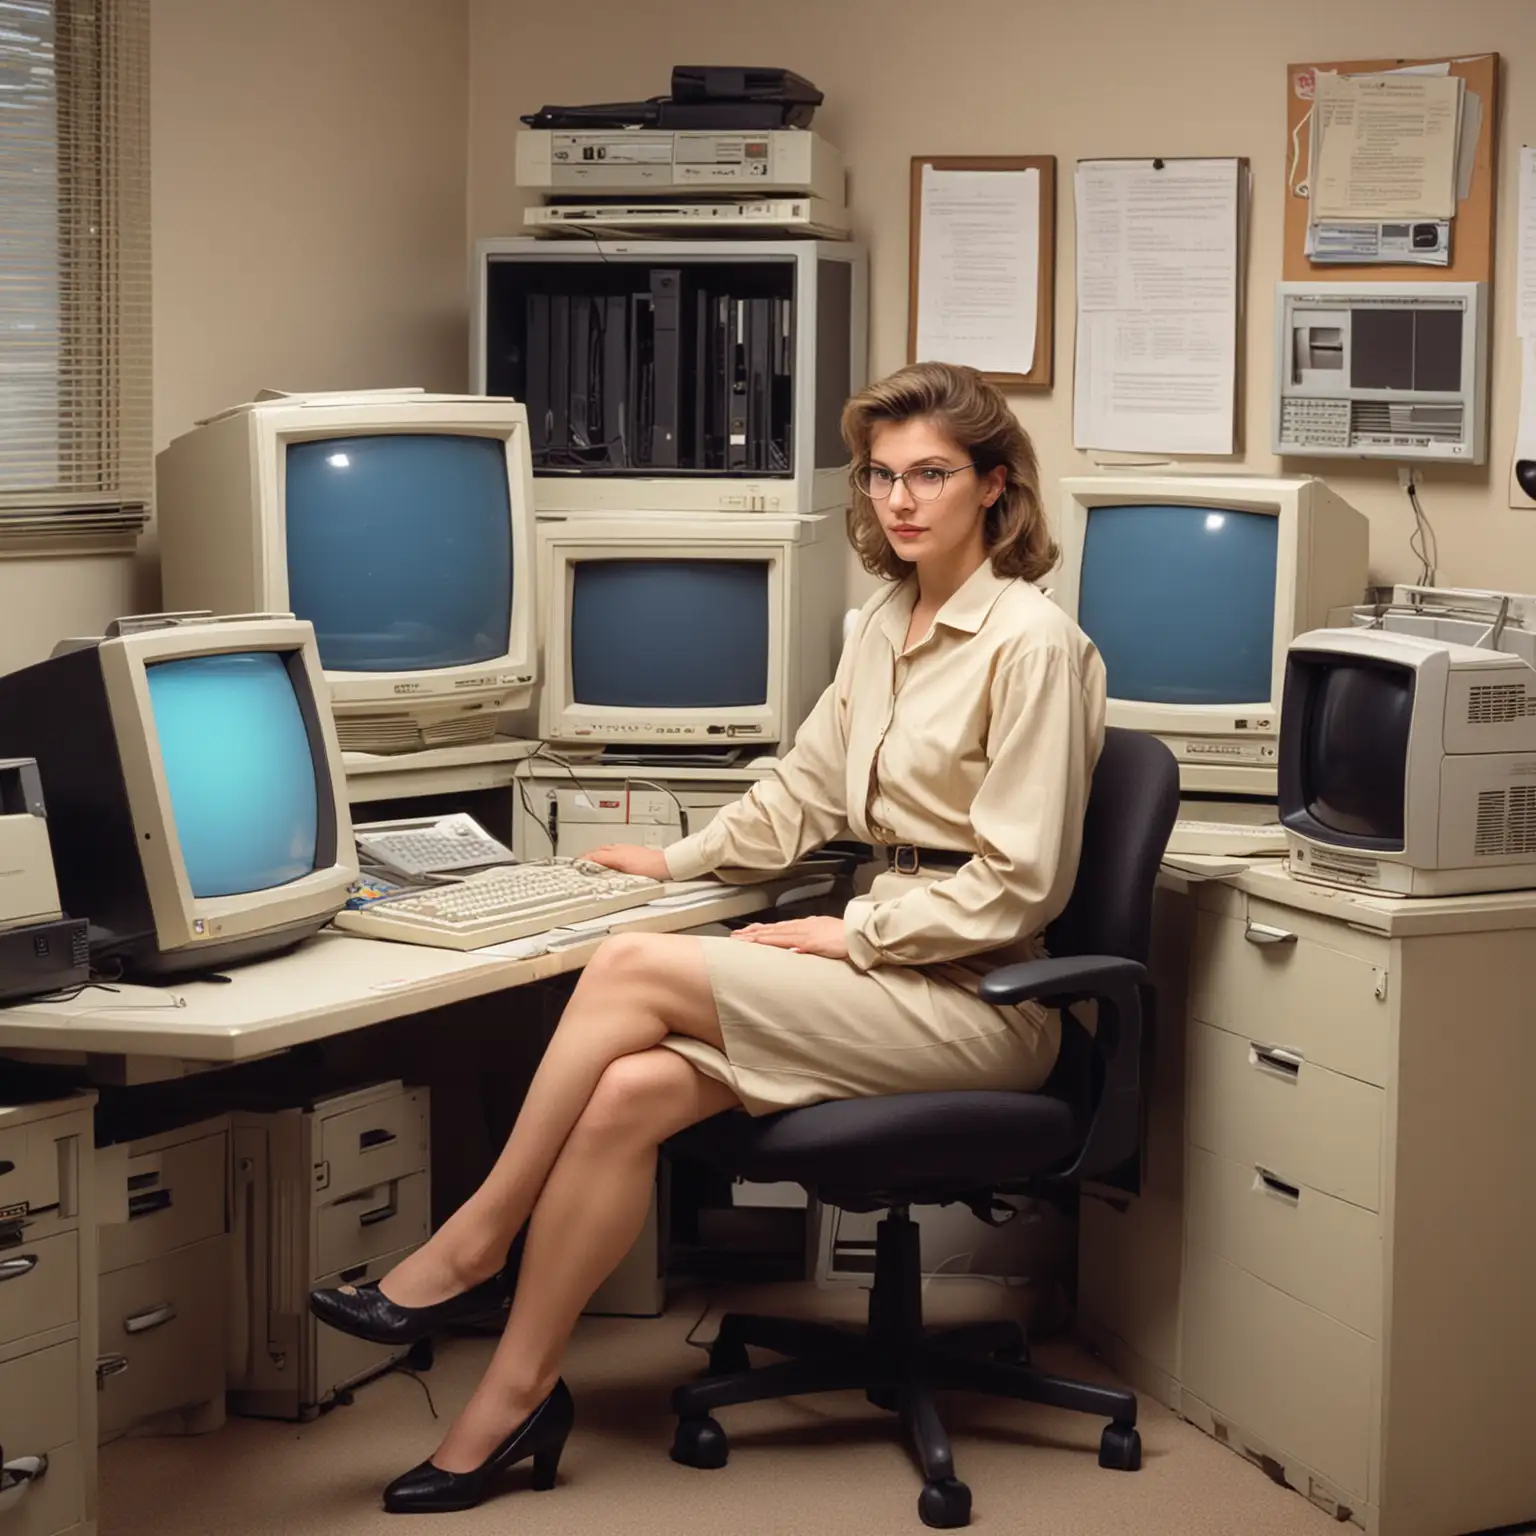 1990's programmer at her desk, CRT monitors, beige computer equipment and computer tower, old office chair